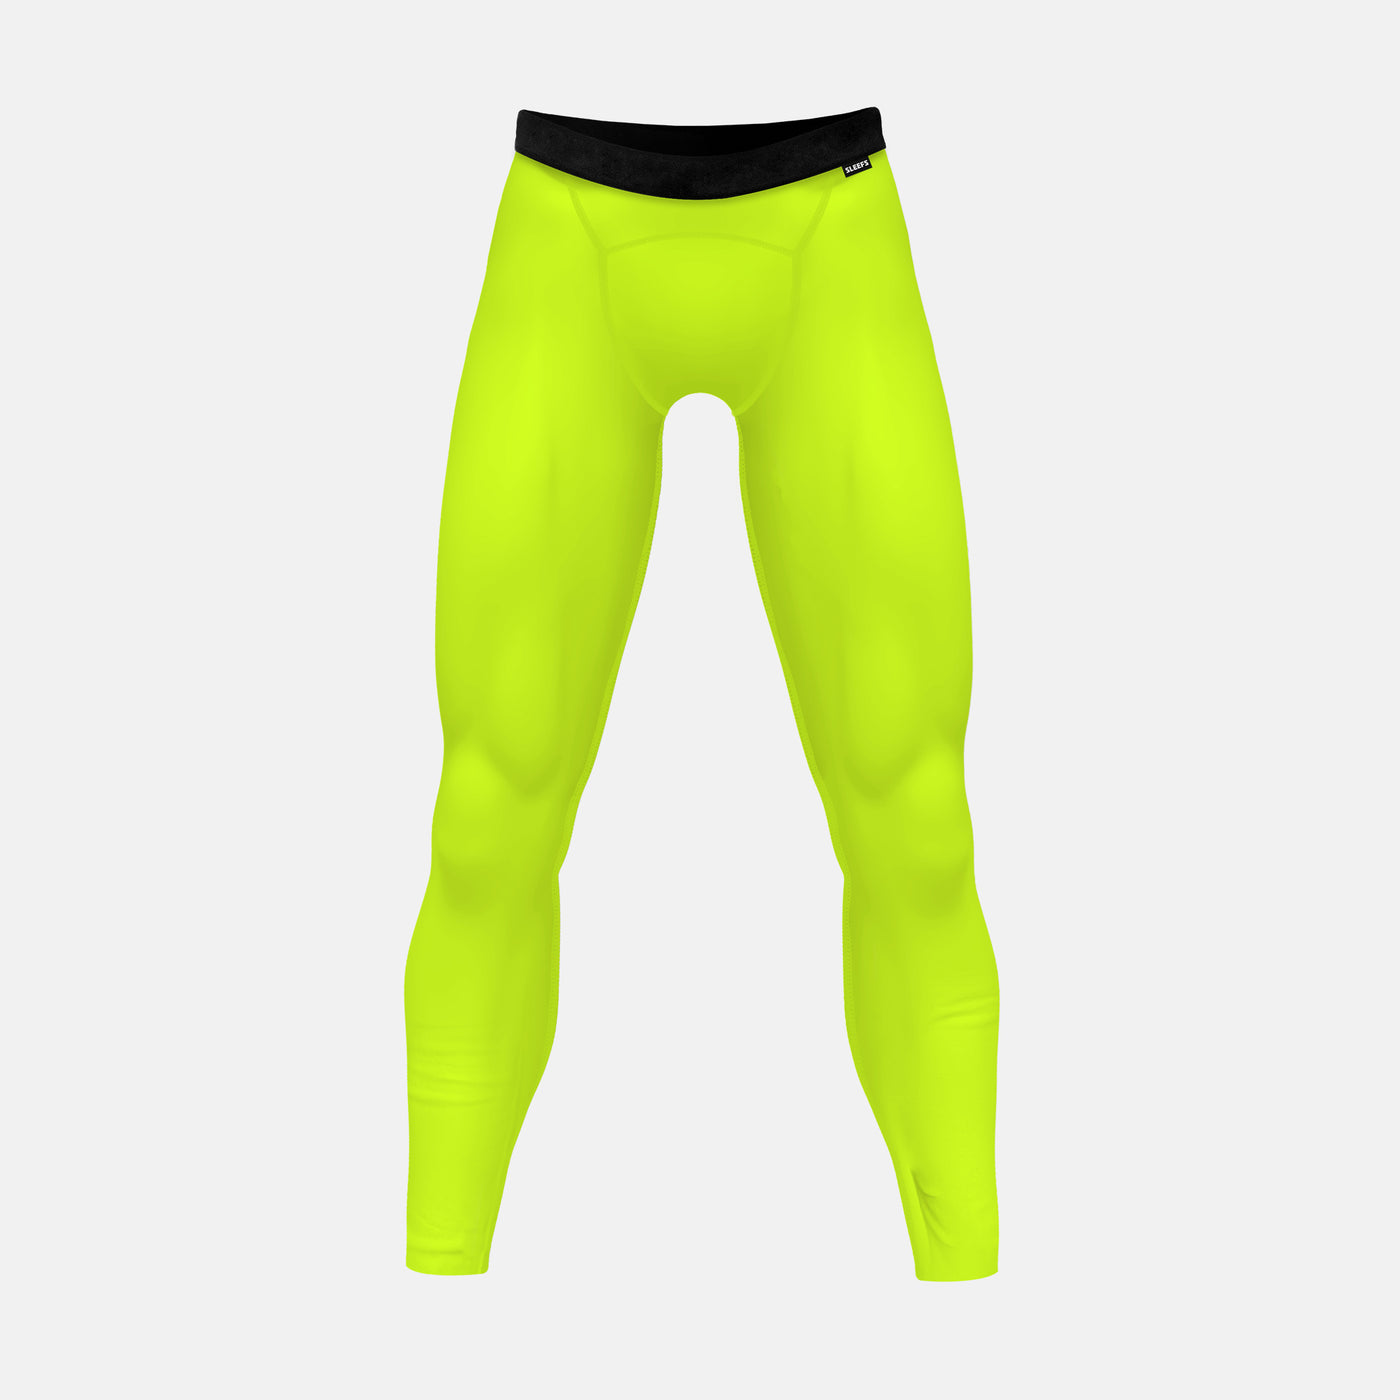 Safety Yellow Tights for Men